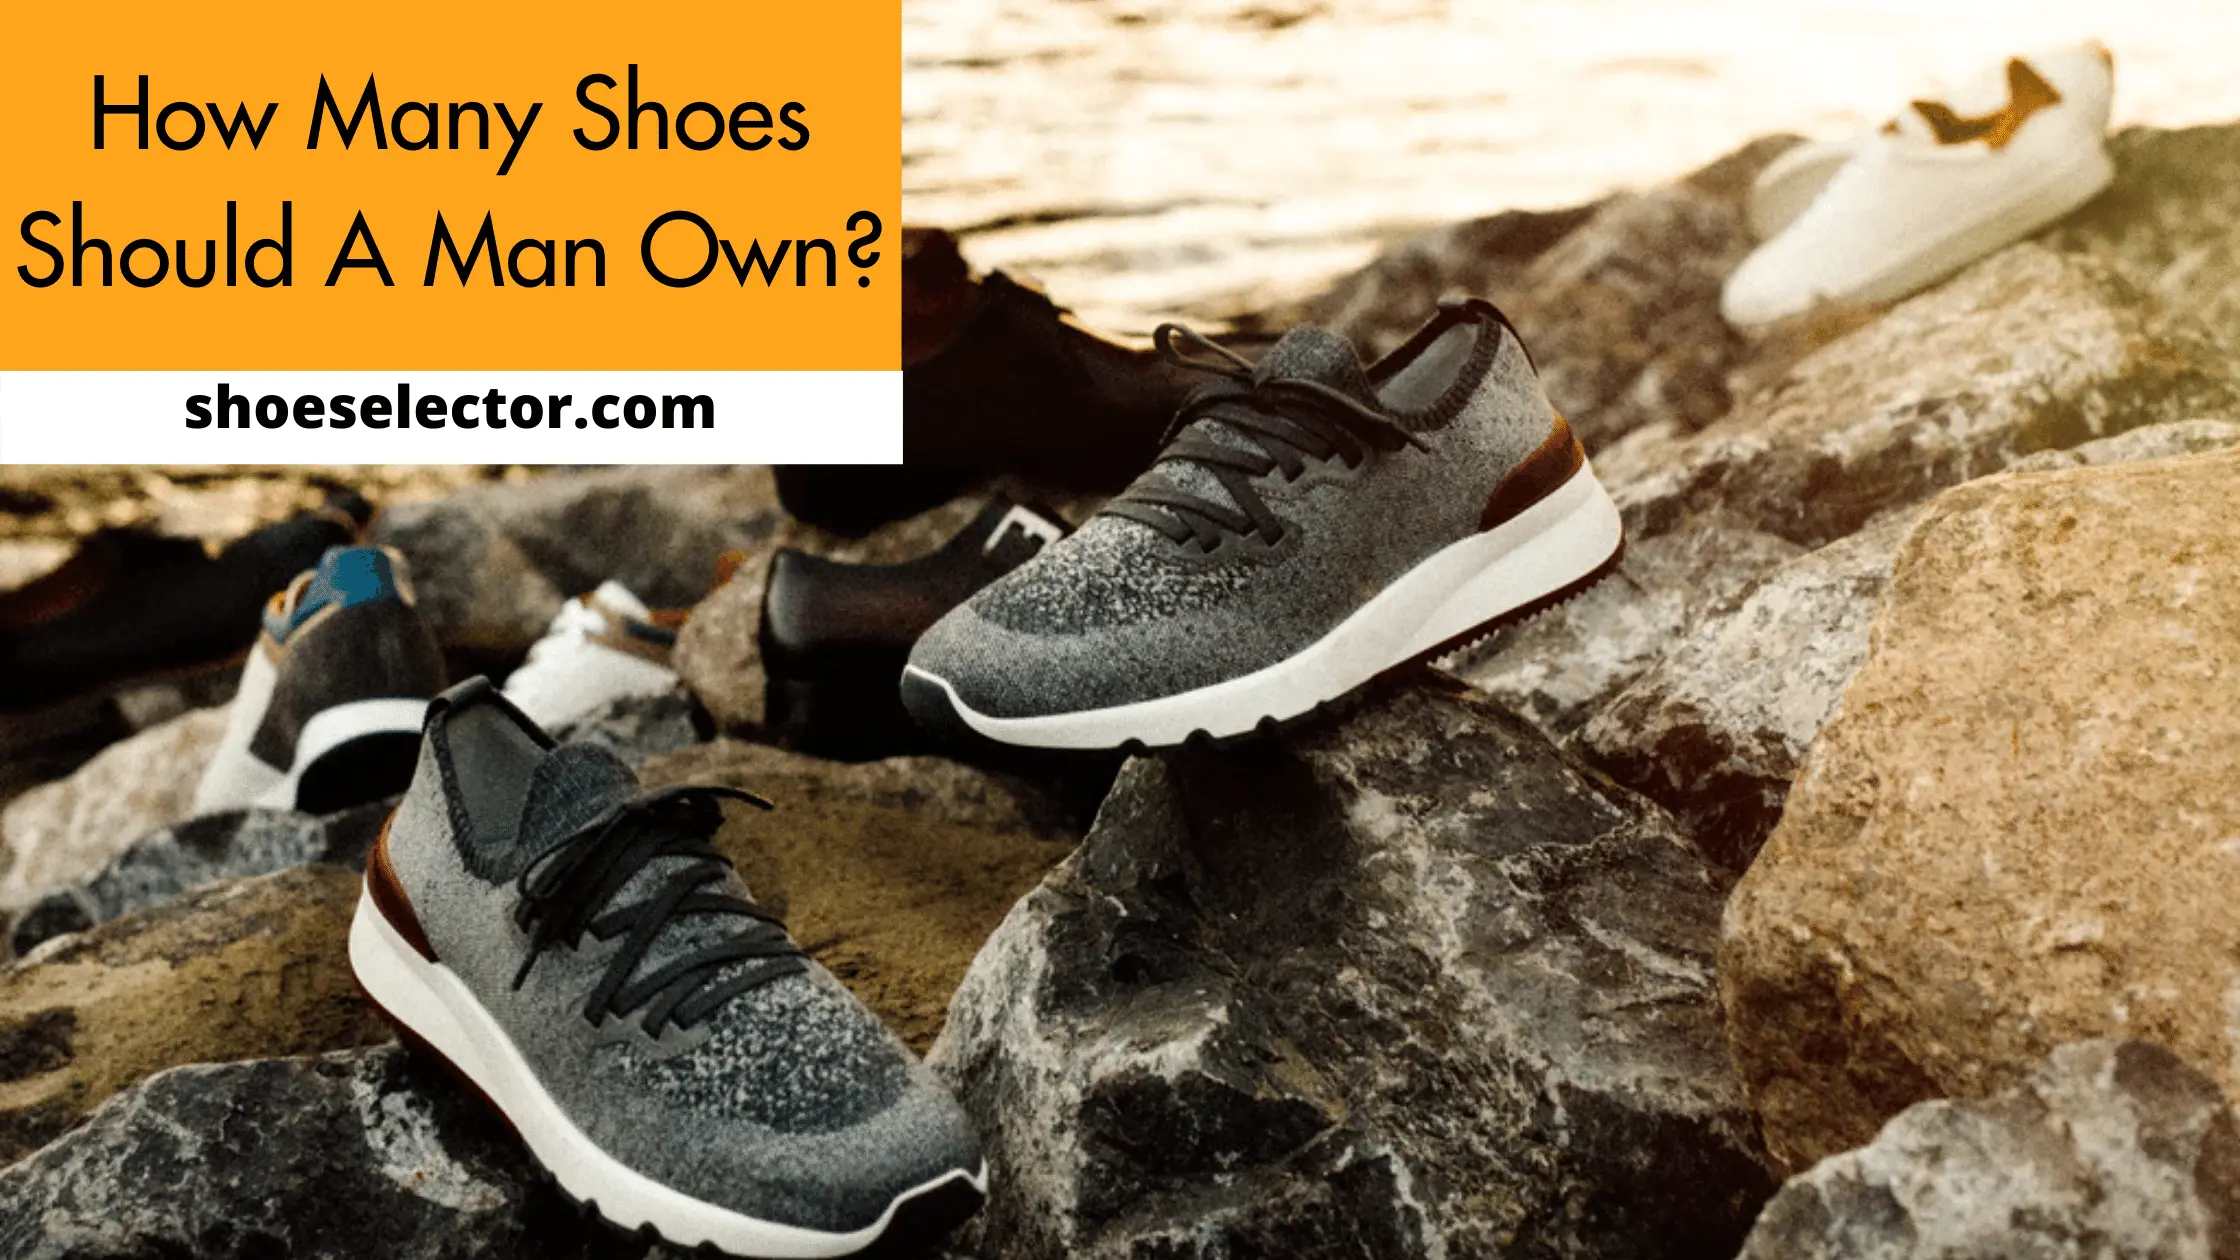 How Many Shoes Should a Man Own? Pro Guide